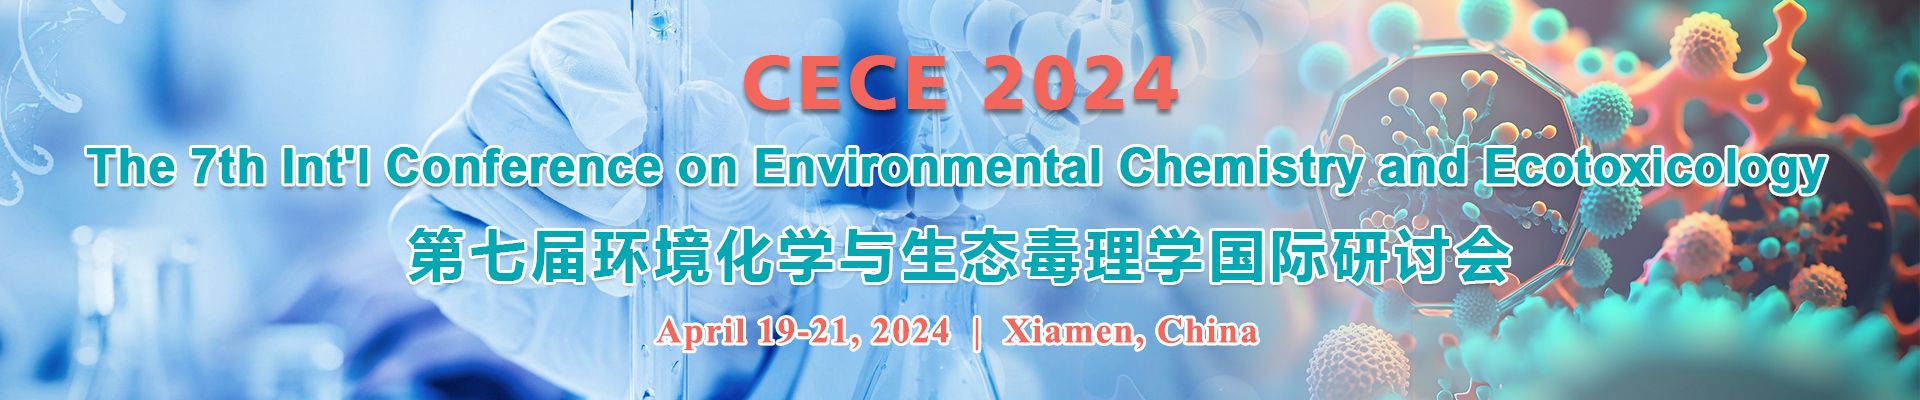 The 7th Int'l Conference on Environmental Chemistry and Ecotoxicology (CECE 2024), Xiamen, Fujian, China